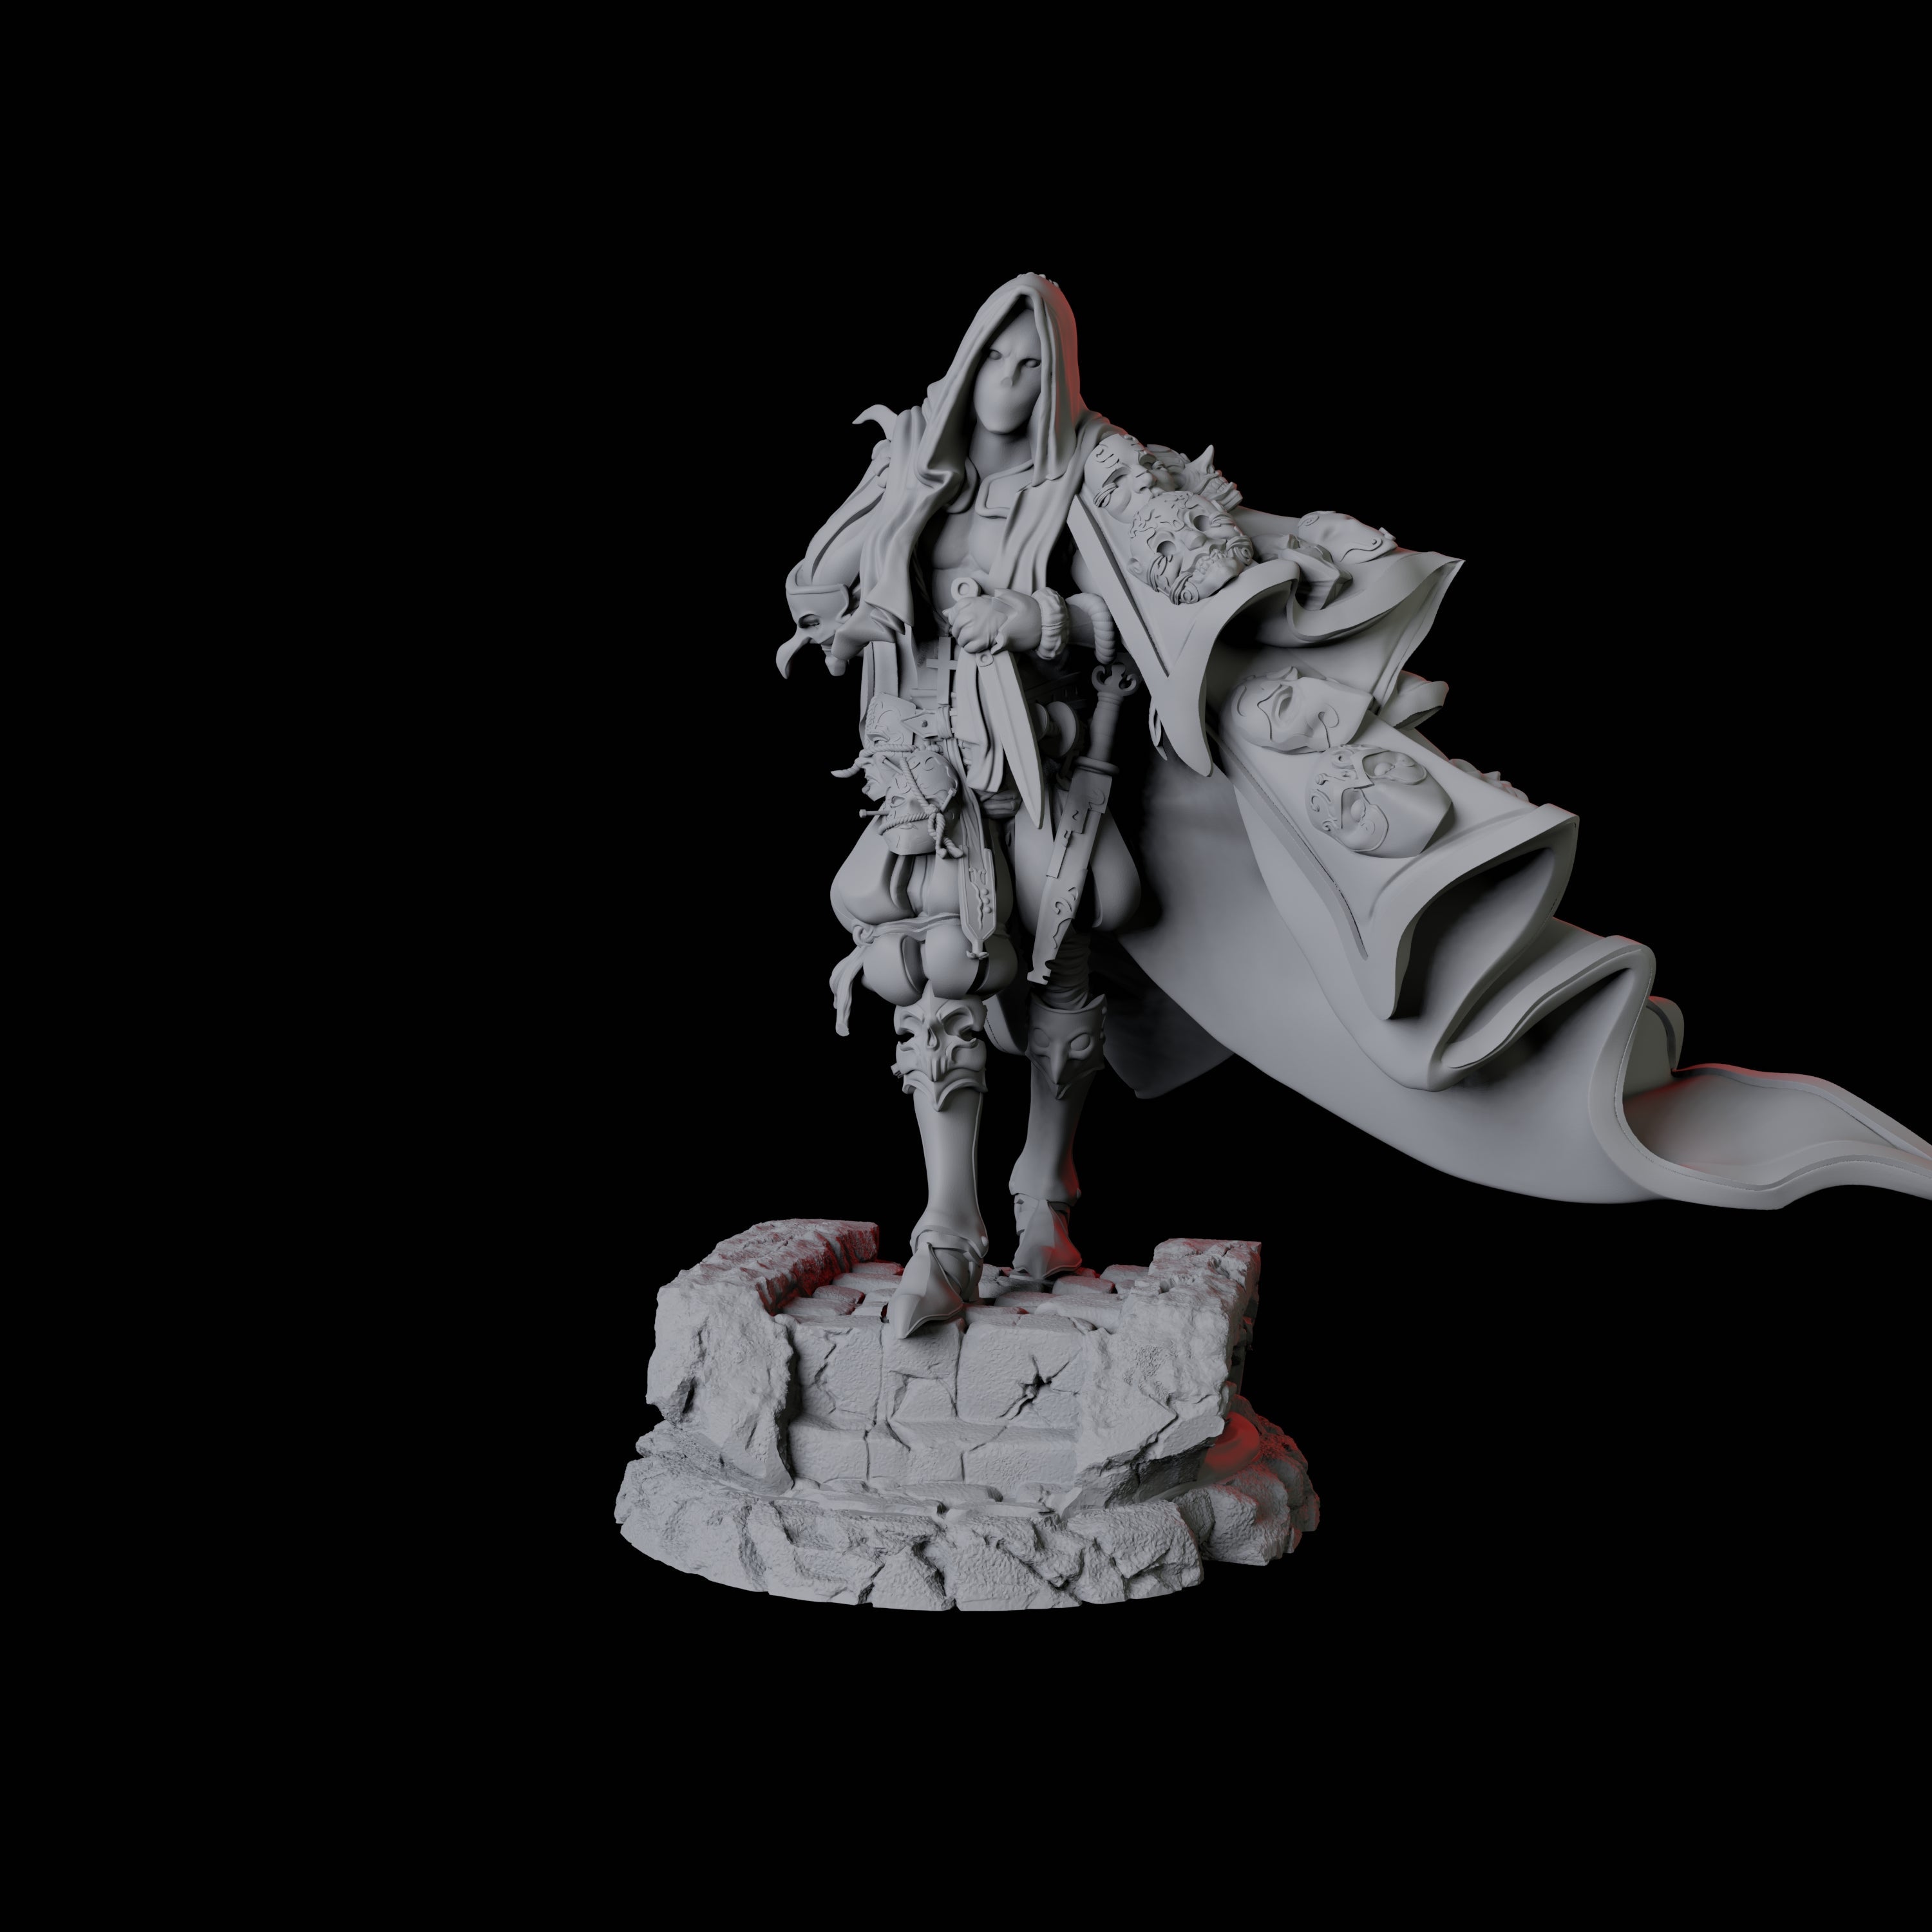 Masked Swordsman B Miniature for Dungeons and Dragons, Pathfinder or other TTRPGs